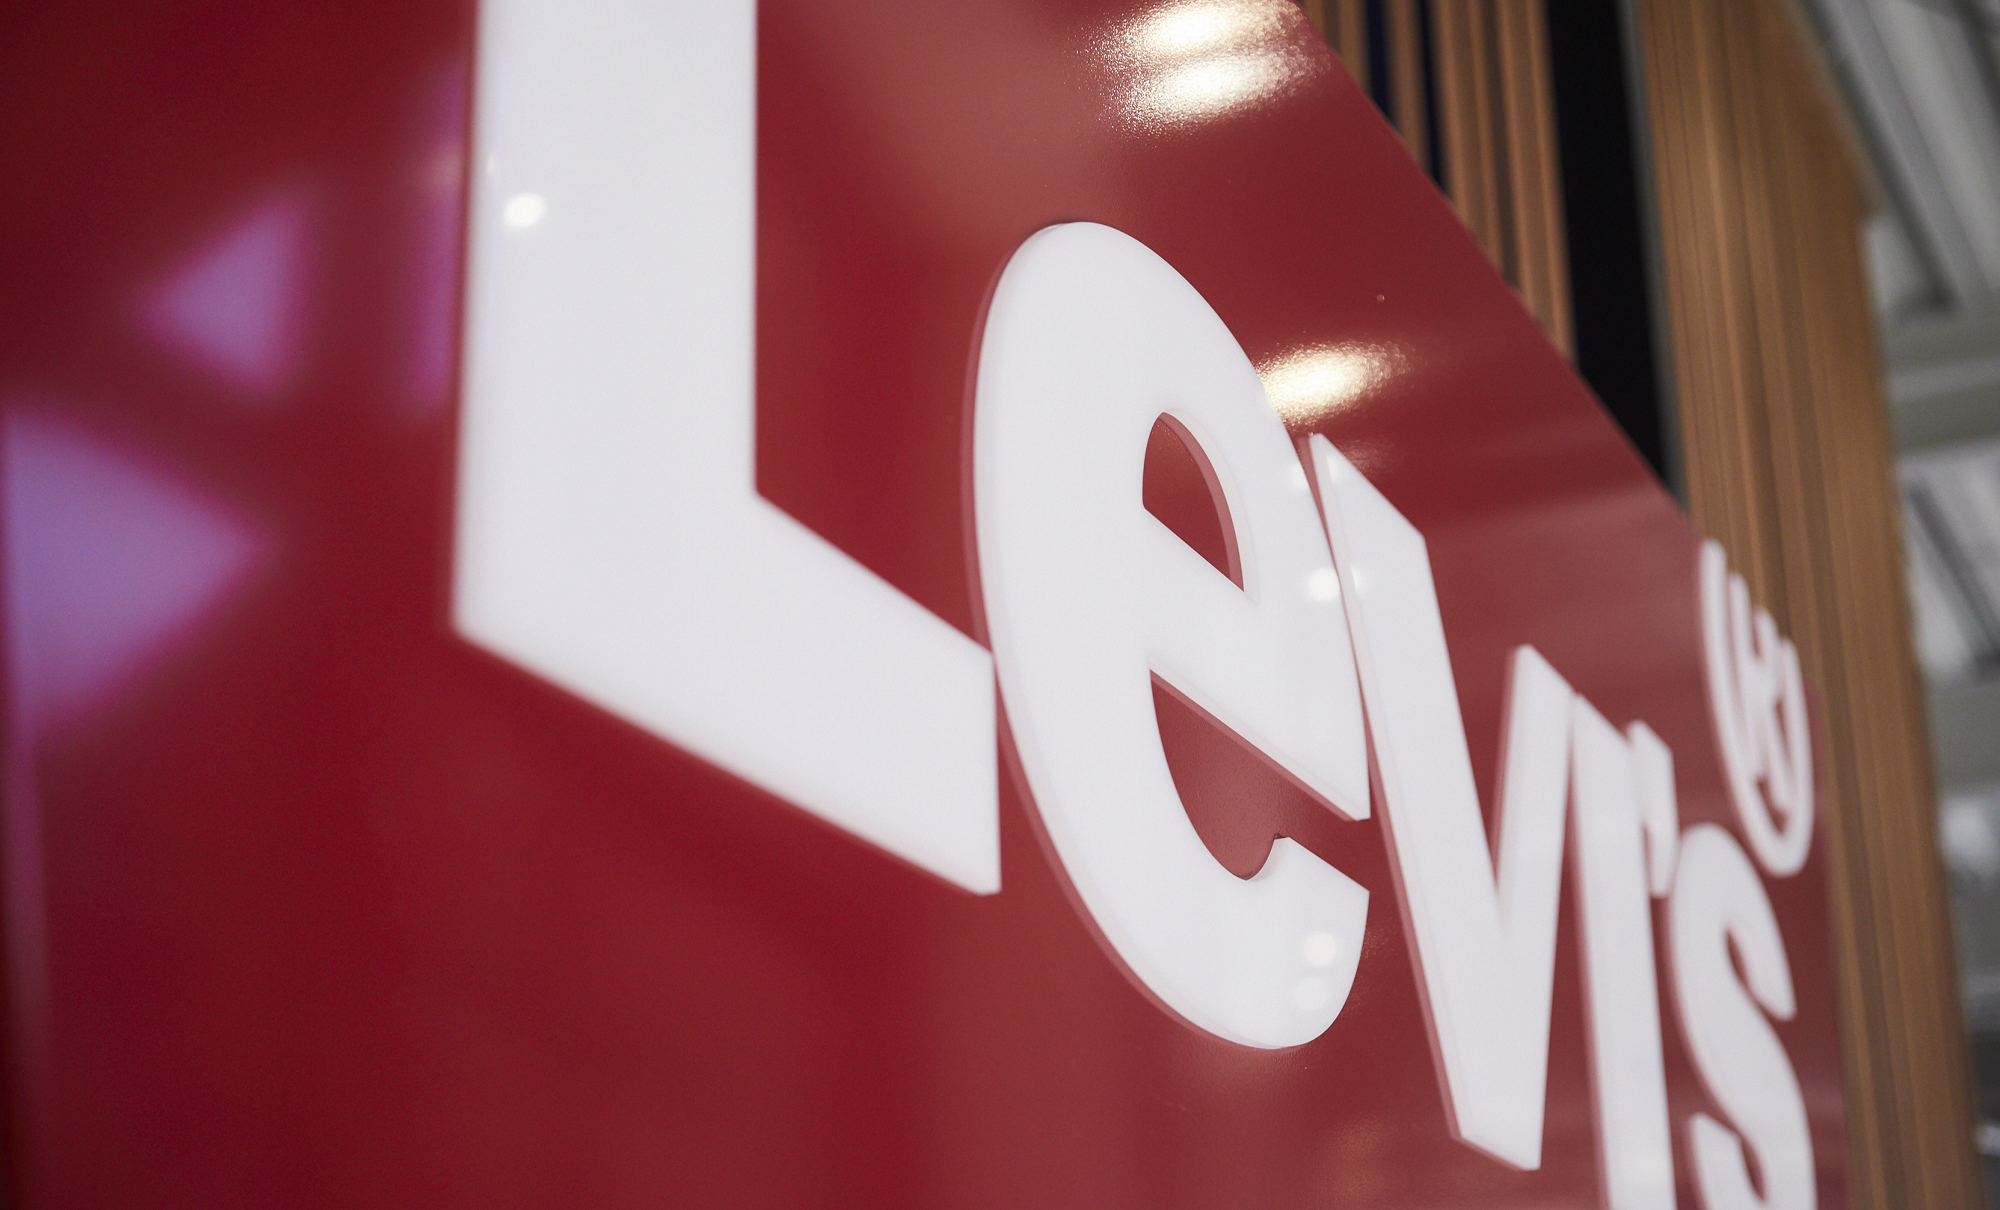 Levi's eyes Meatpacking site for new store - The Real Deal